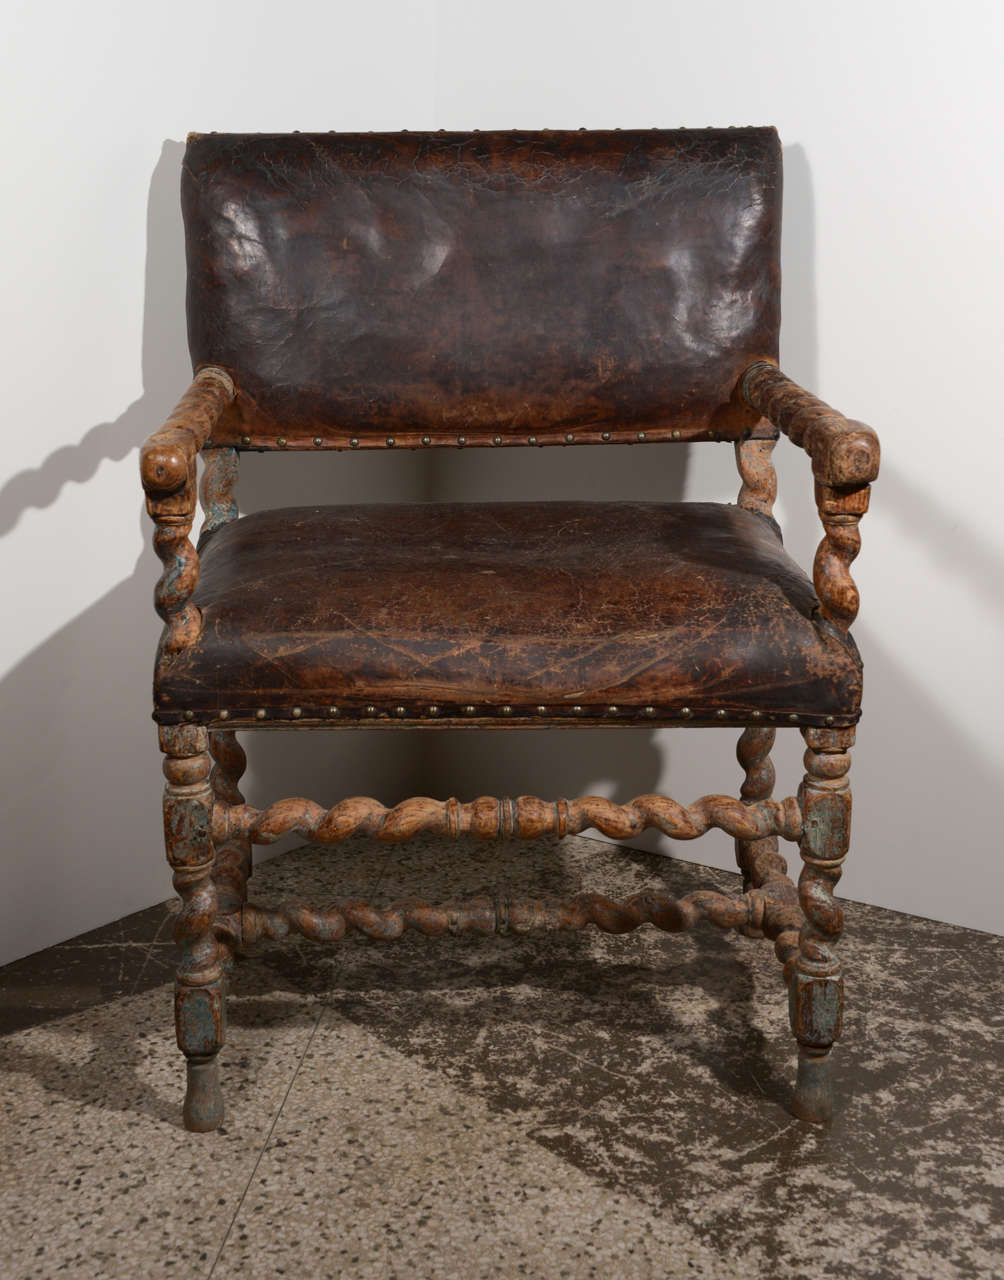 Late 17th c.- early 18th c. Baroque chair with barley twist carving and antique leather seat and back. Traces of original blue paint.